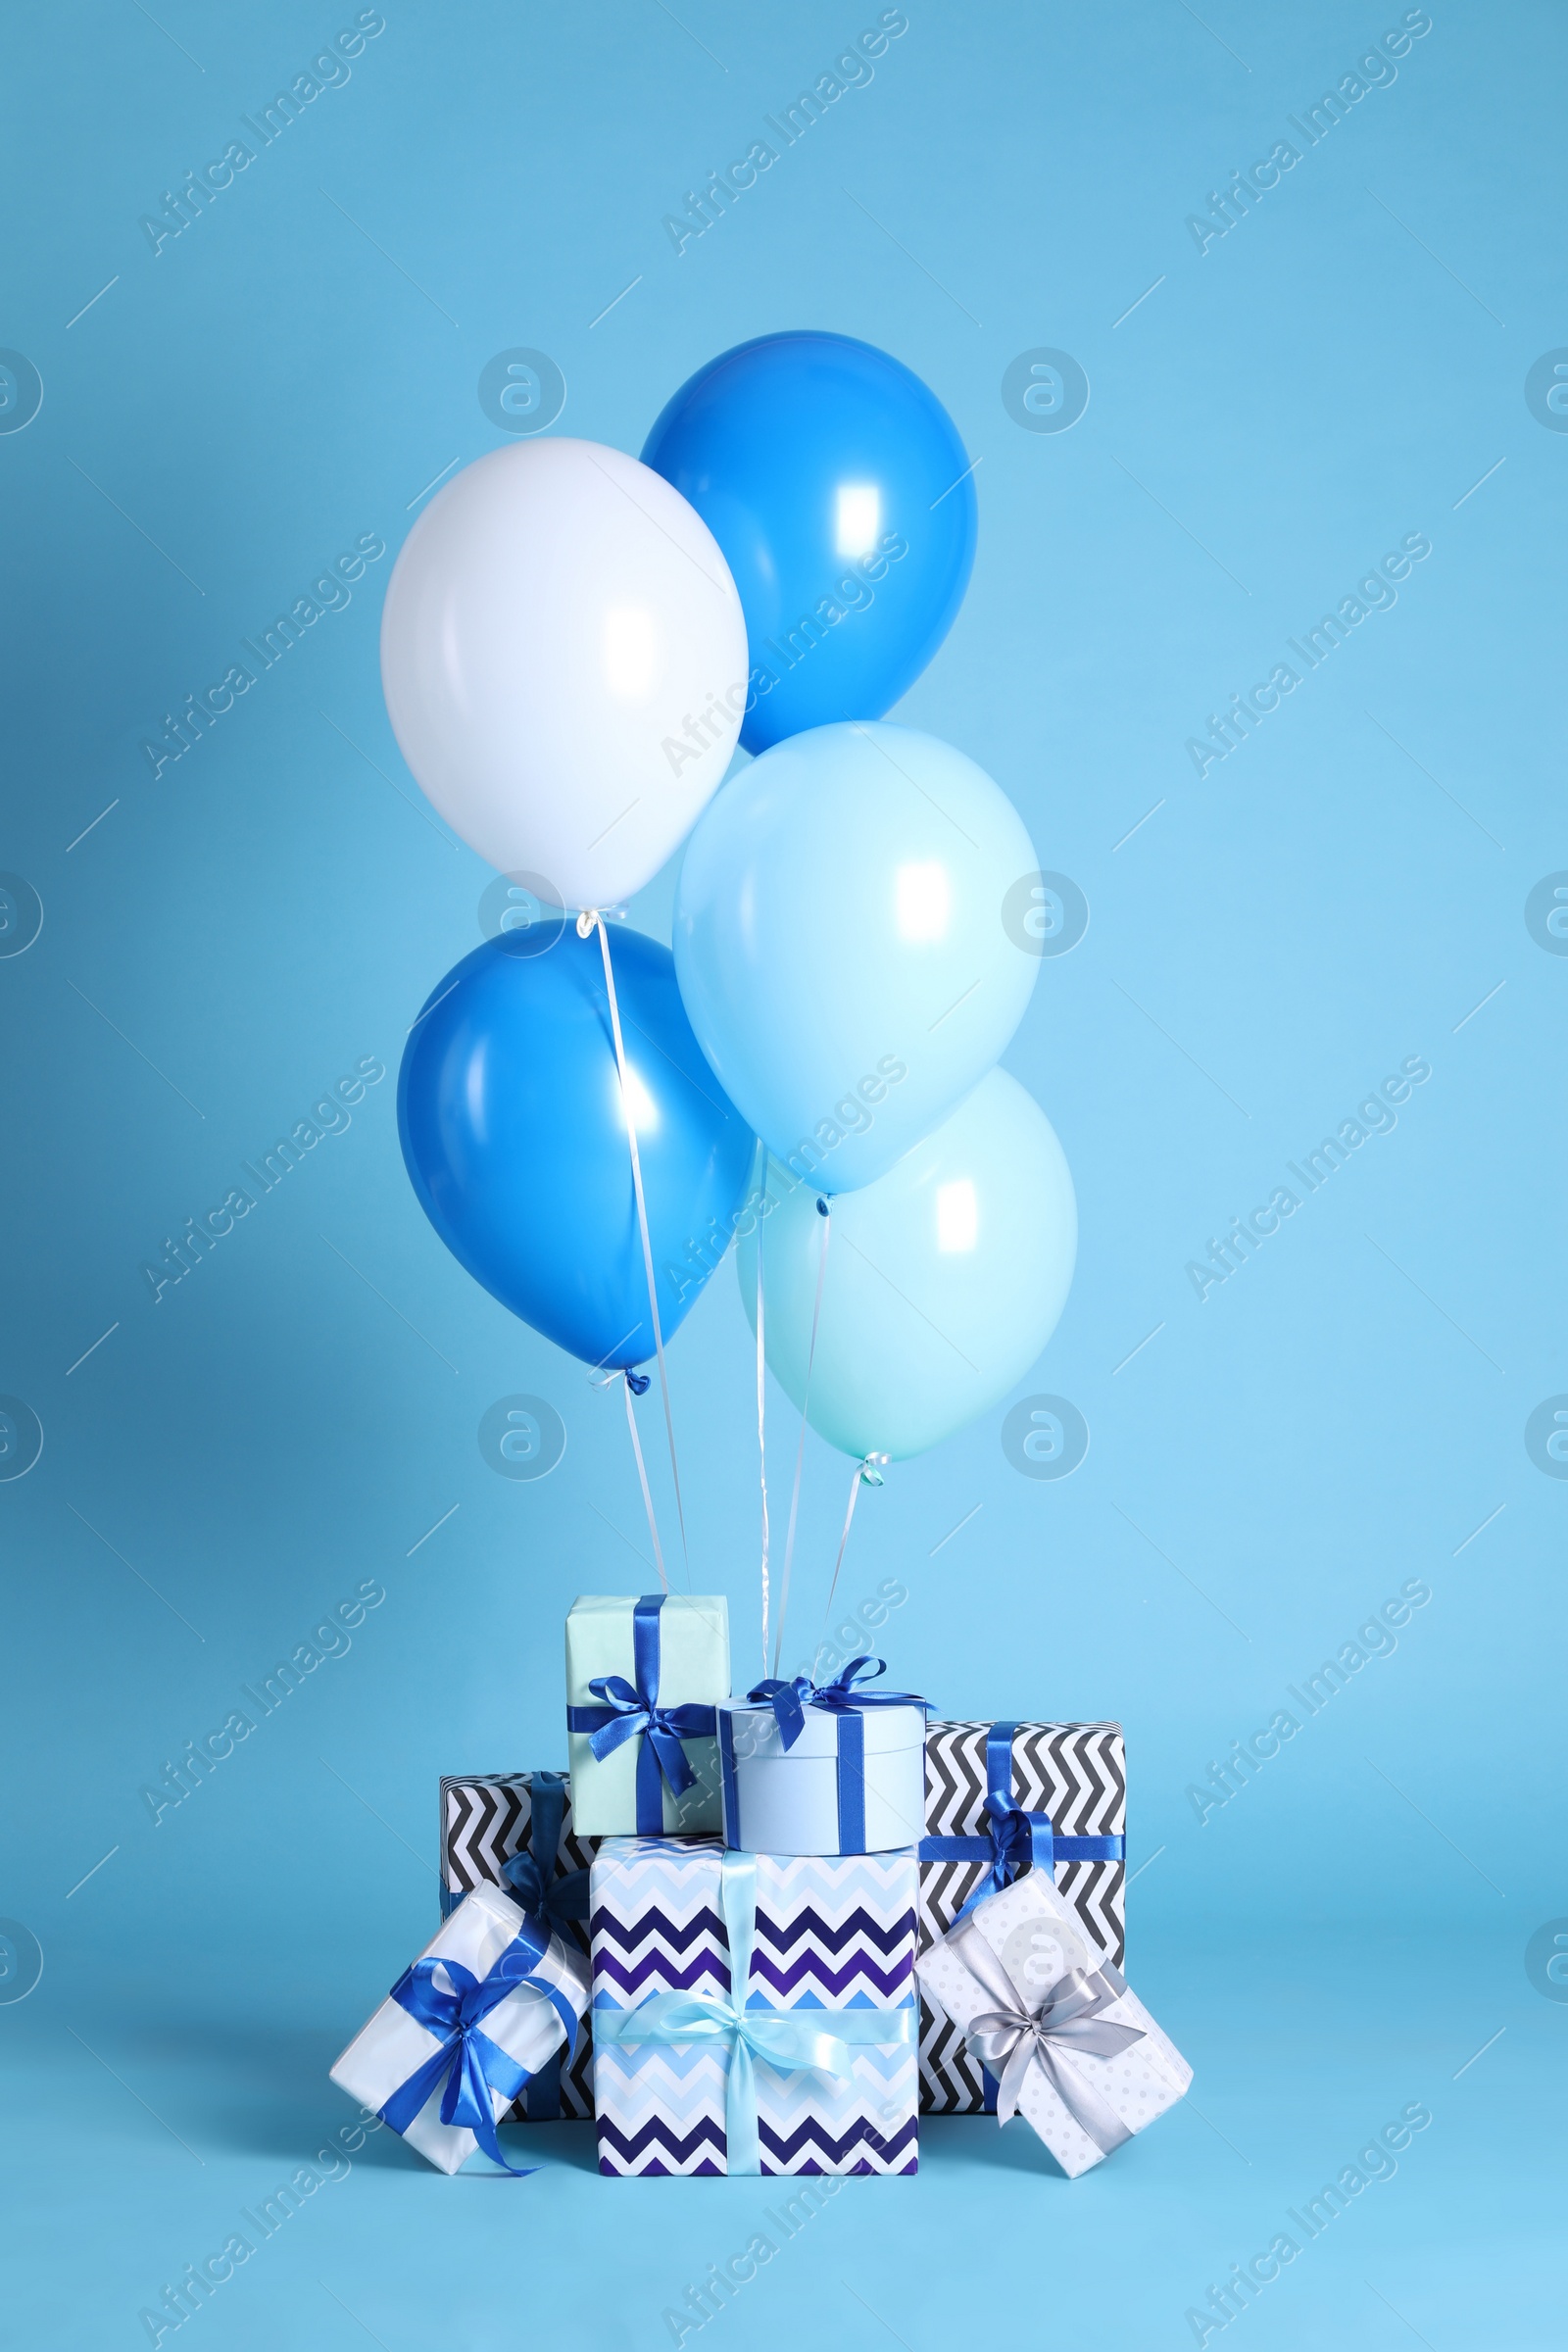 Photo of Many gift boxes and balloons on light blue background